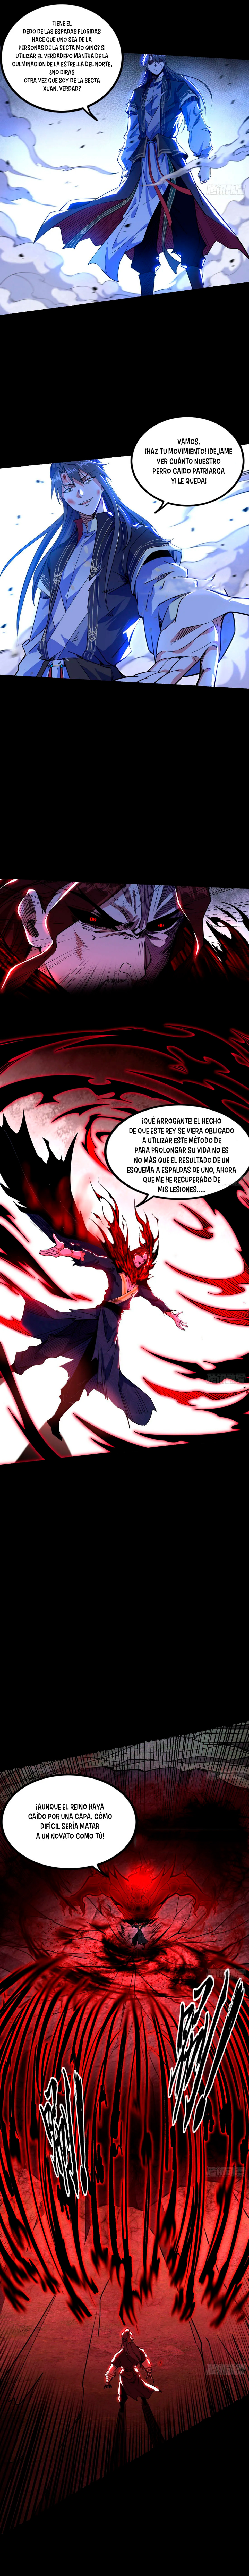 Manga Soy un dios maligno Chapter 307 image number 2